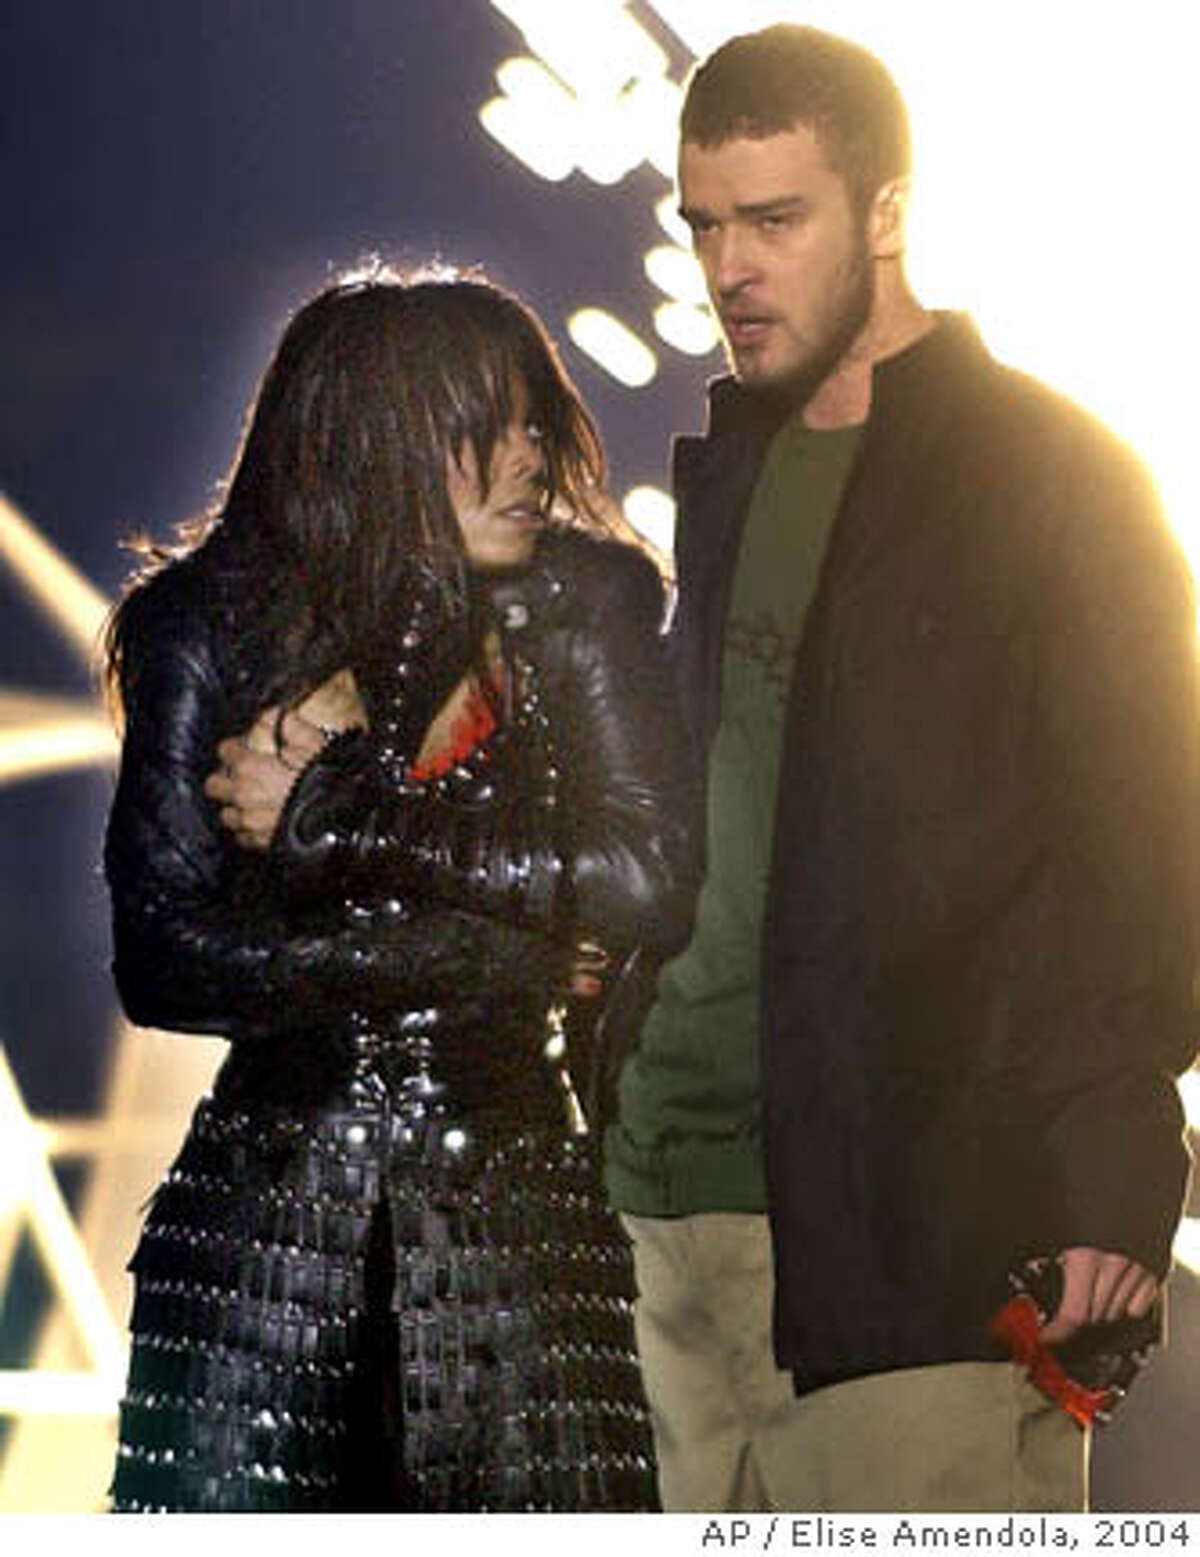 Singer Janet Jackson, left, covers her breast after her outfit came undone during a number with Justin Timberlake during the halftime show of Super Bowl XXXVIII in Houston, Sunday, Feb. 1, 2004. (AP Photo/Elise Amendola) ALSO RAN: 2/3/2004, 09-12-2004 Undone: Janet Jackson and Justin Timberlake are apologizing for what they insist was an accidental exposure of her breast during the halftime show. Taboo Tunes by Peter Blecha, below: false alarms? Taboo Tunes by Peter Blecha, below: false alarms? Ran on: 02-04-2007 TiVos technology found a spike in audience reaction when Justin Timberlake exposed Janet Jacksons breast at a halftime show.